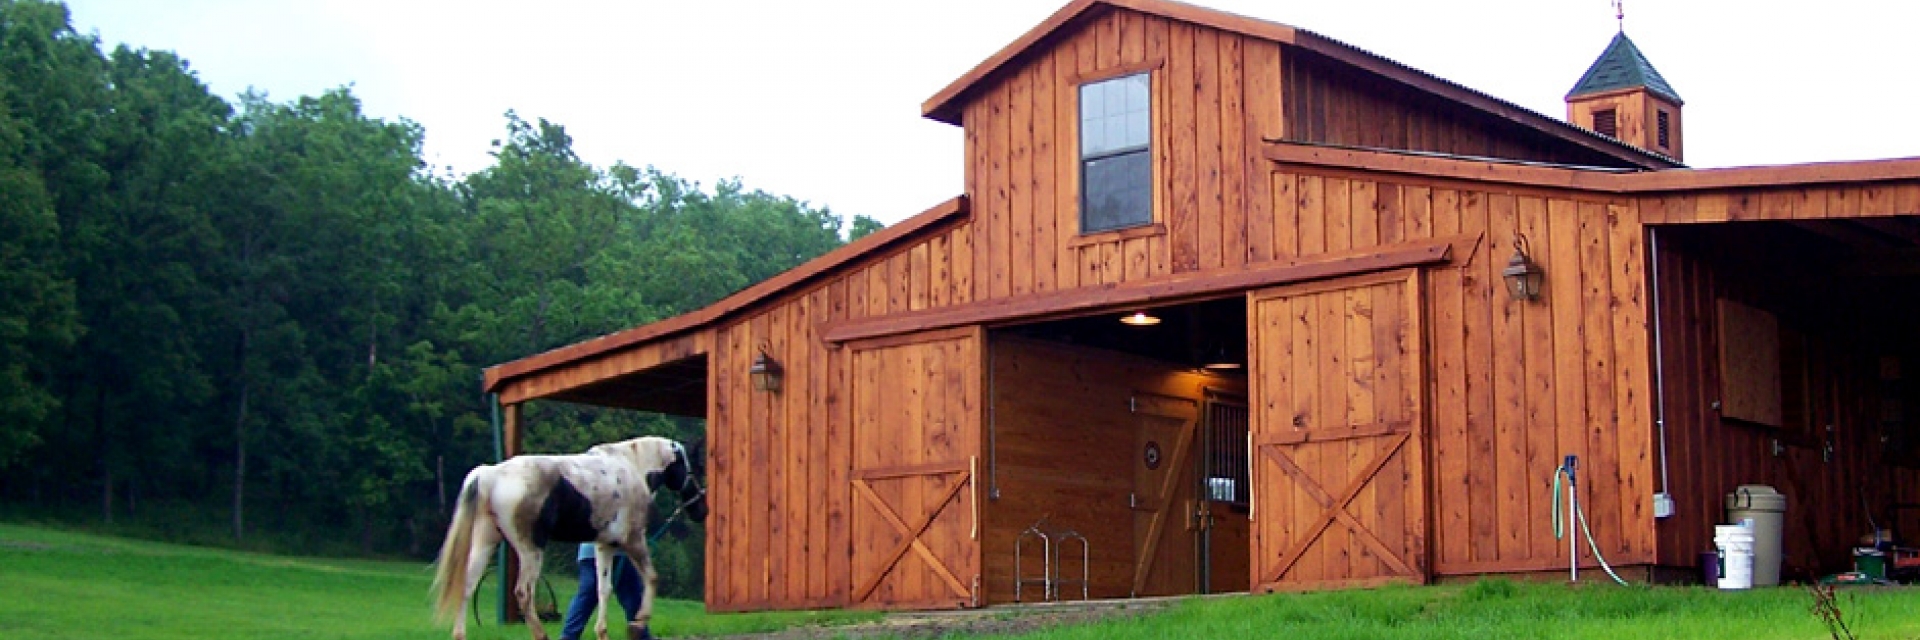 Barns And Buildings Quality Barns And Buildings Horse Barns All Wood Quality Custom Wood Barns Barn Homes Rustic Barn Home Horse Facility Horse Stalls